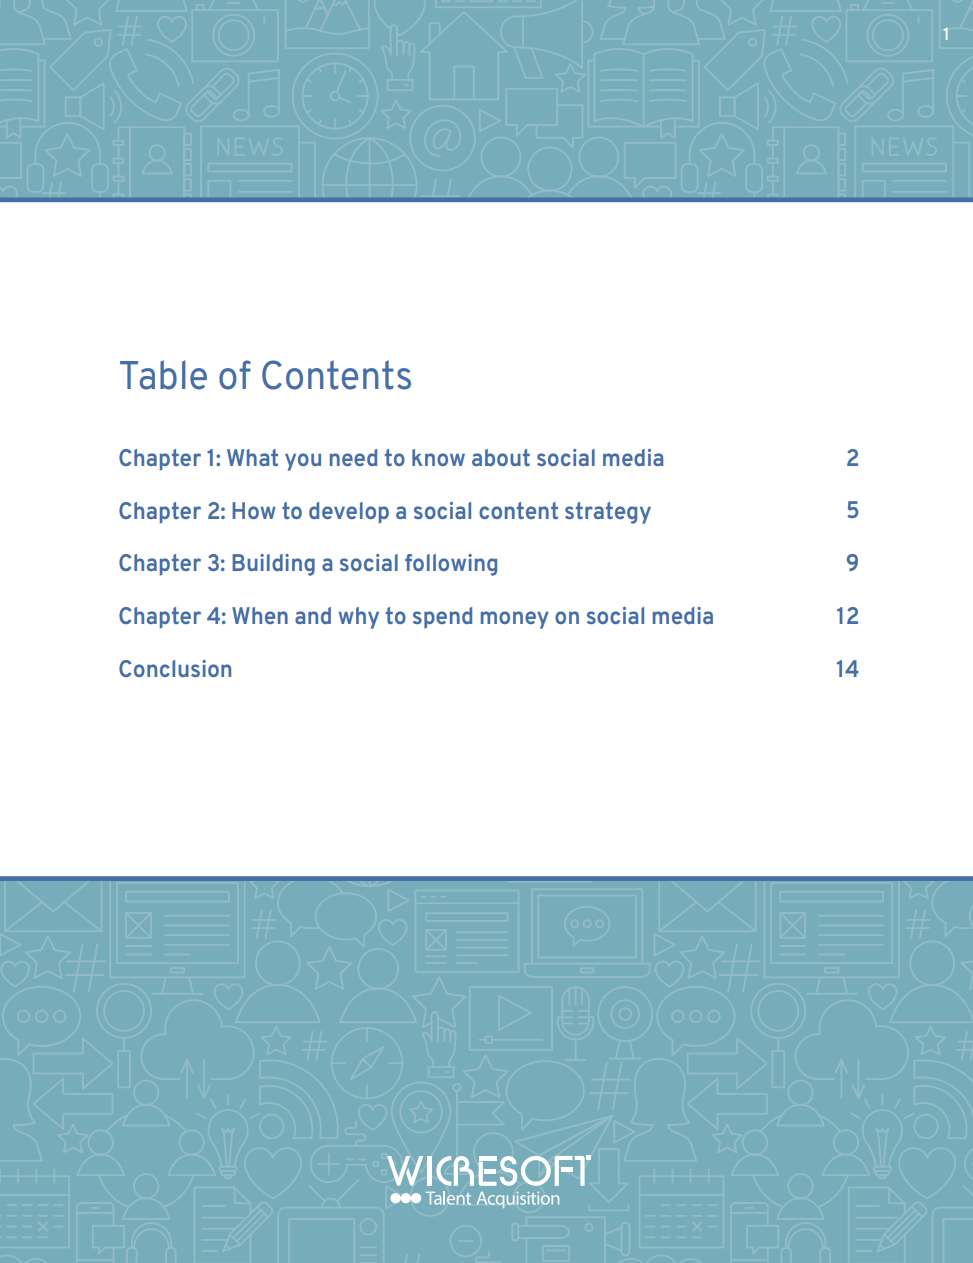 Wicresoft Social Media Guie Table of Contents